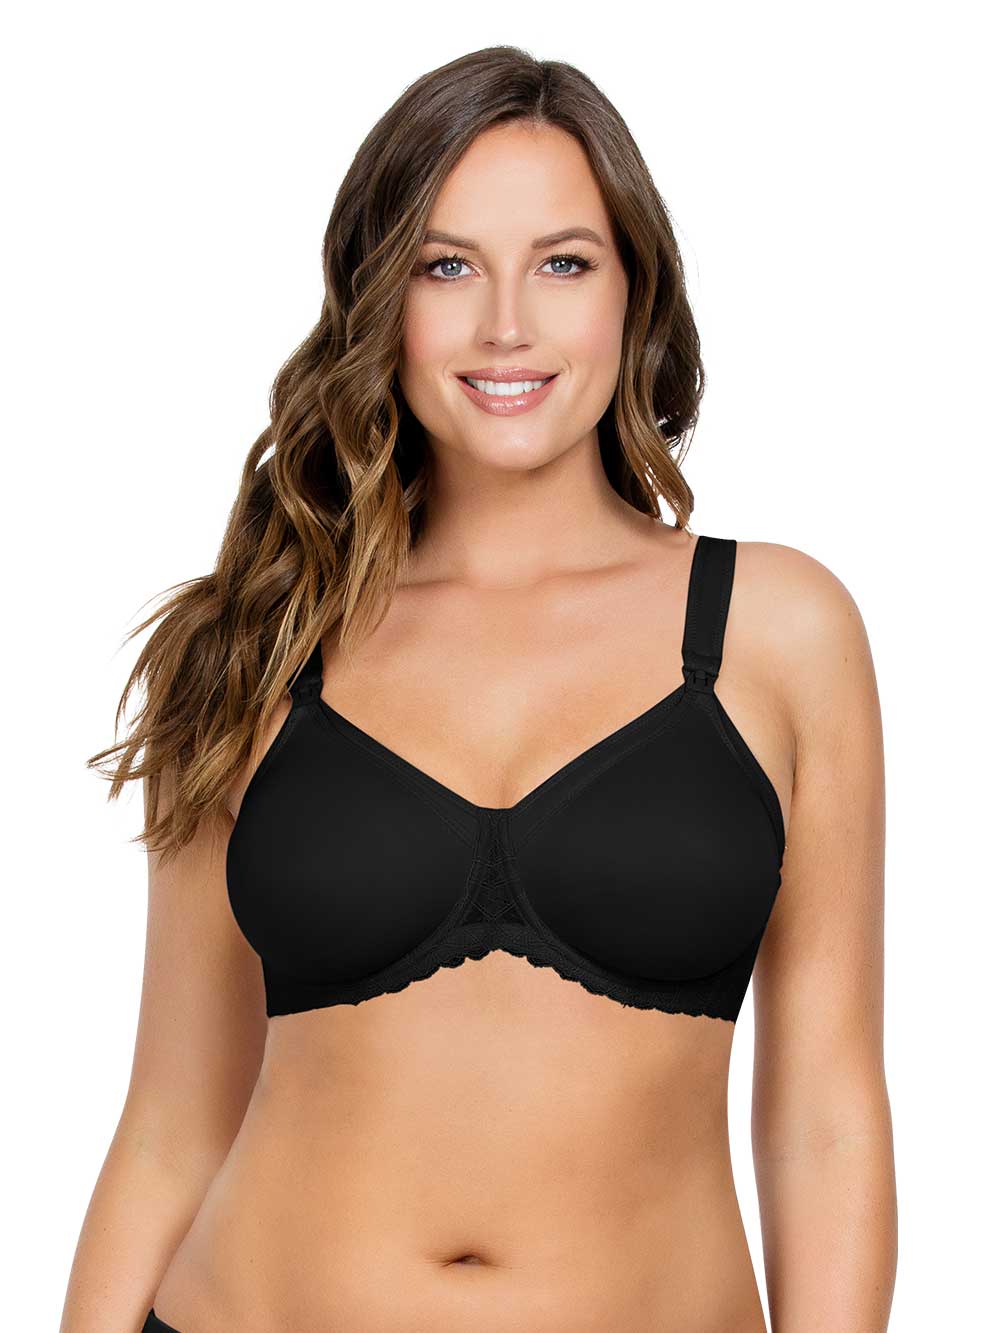 Plus Size Bras, Sexy Bras for Plus Size, Bigger & Full Figure Bras Tagged  BABYDOLL - HauteFlair